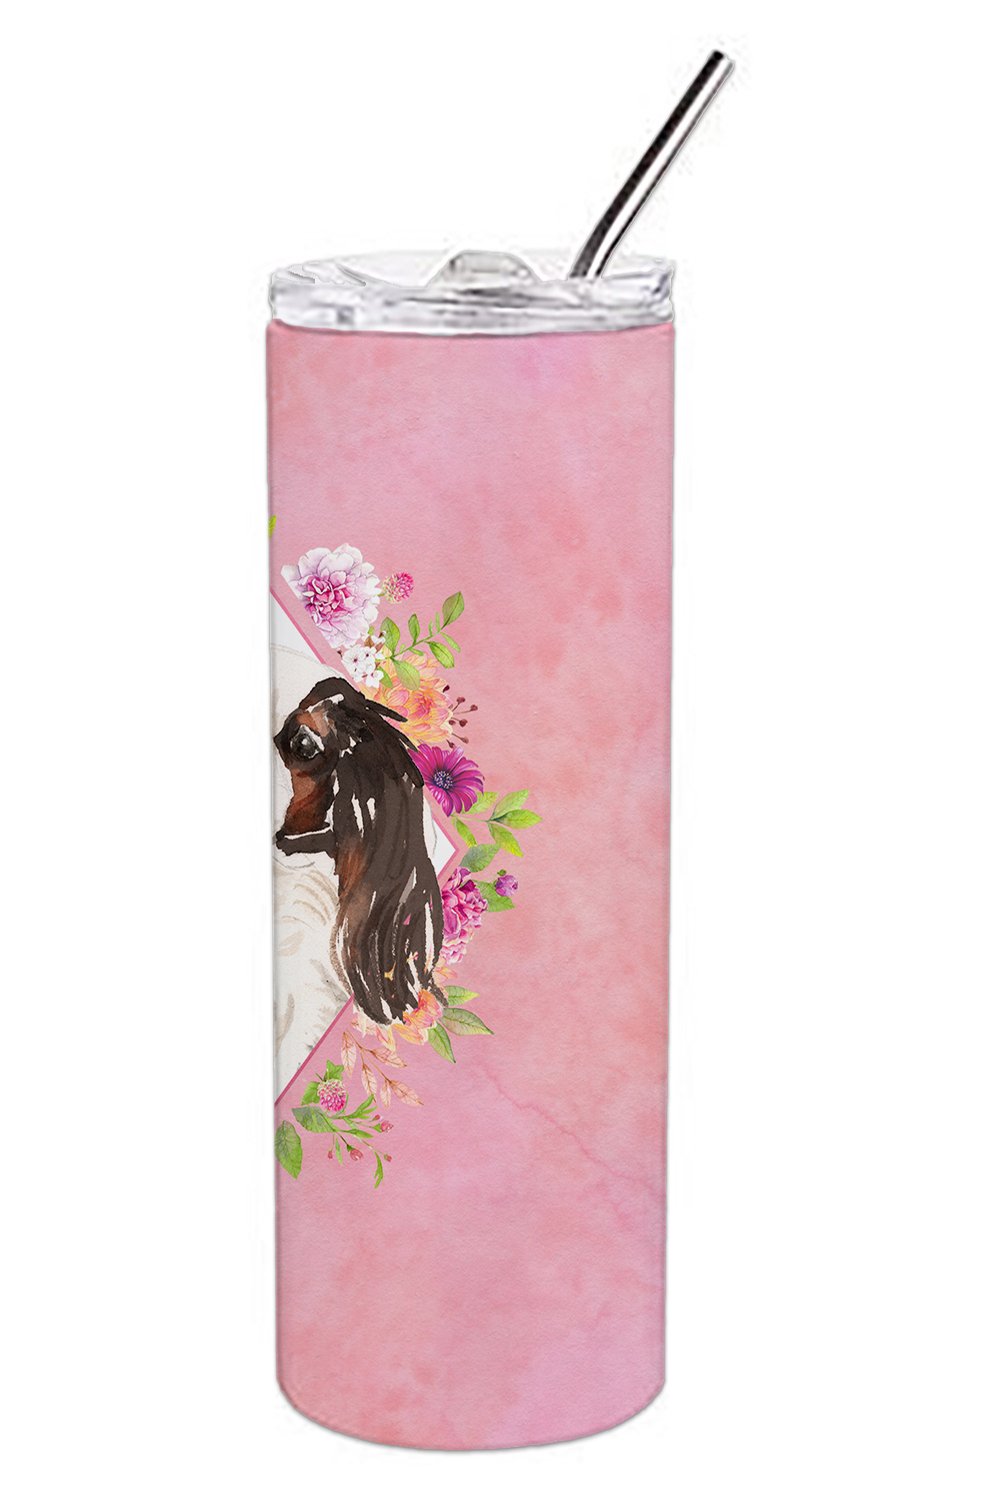 Tricolor Cavalier Spaniel Pink Flowers Double Walled Stainless Steel 20 oz Skinny Tumbler CK4206TBL20 by Caroline's Treasures